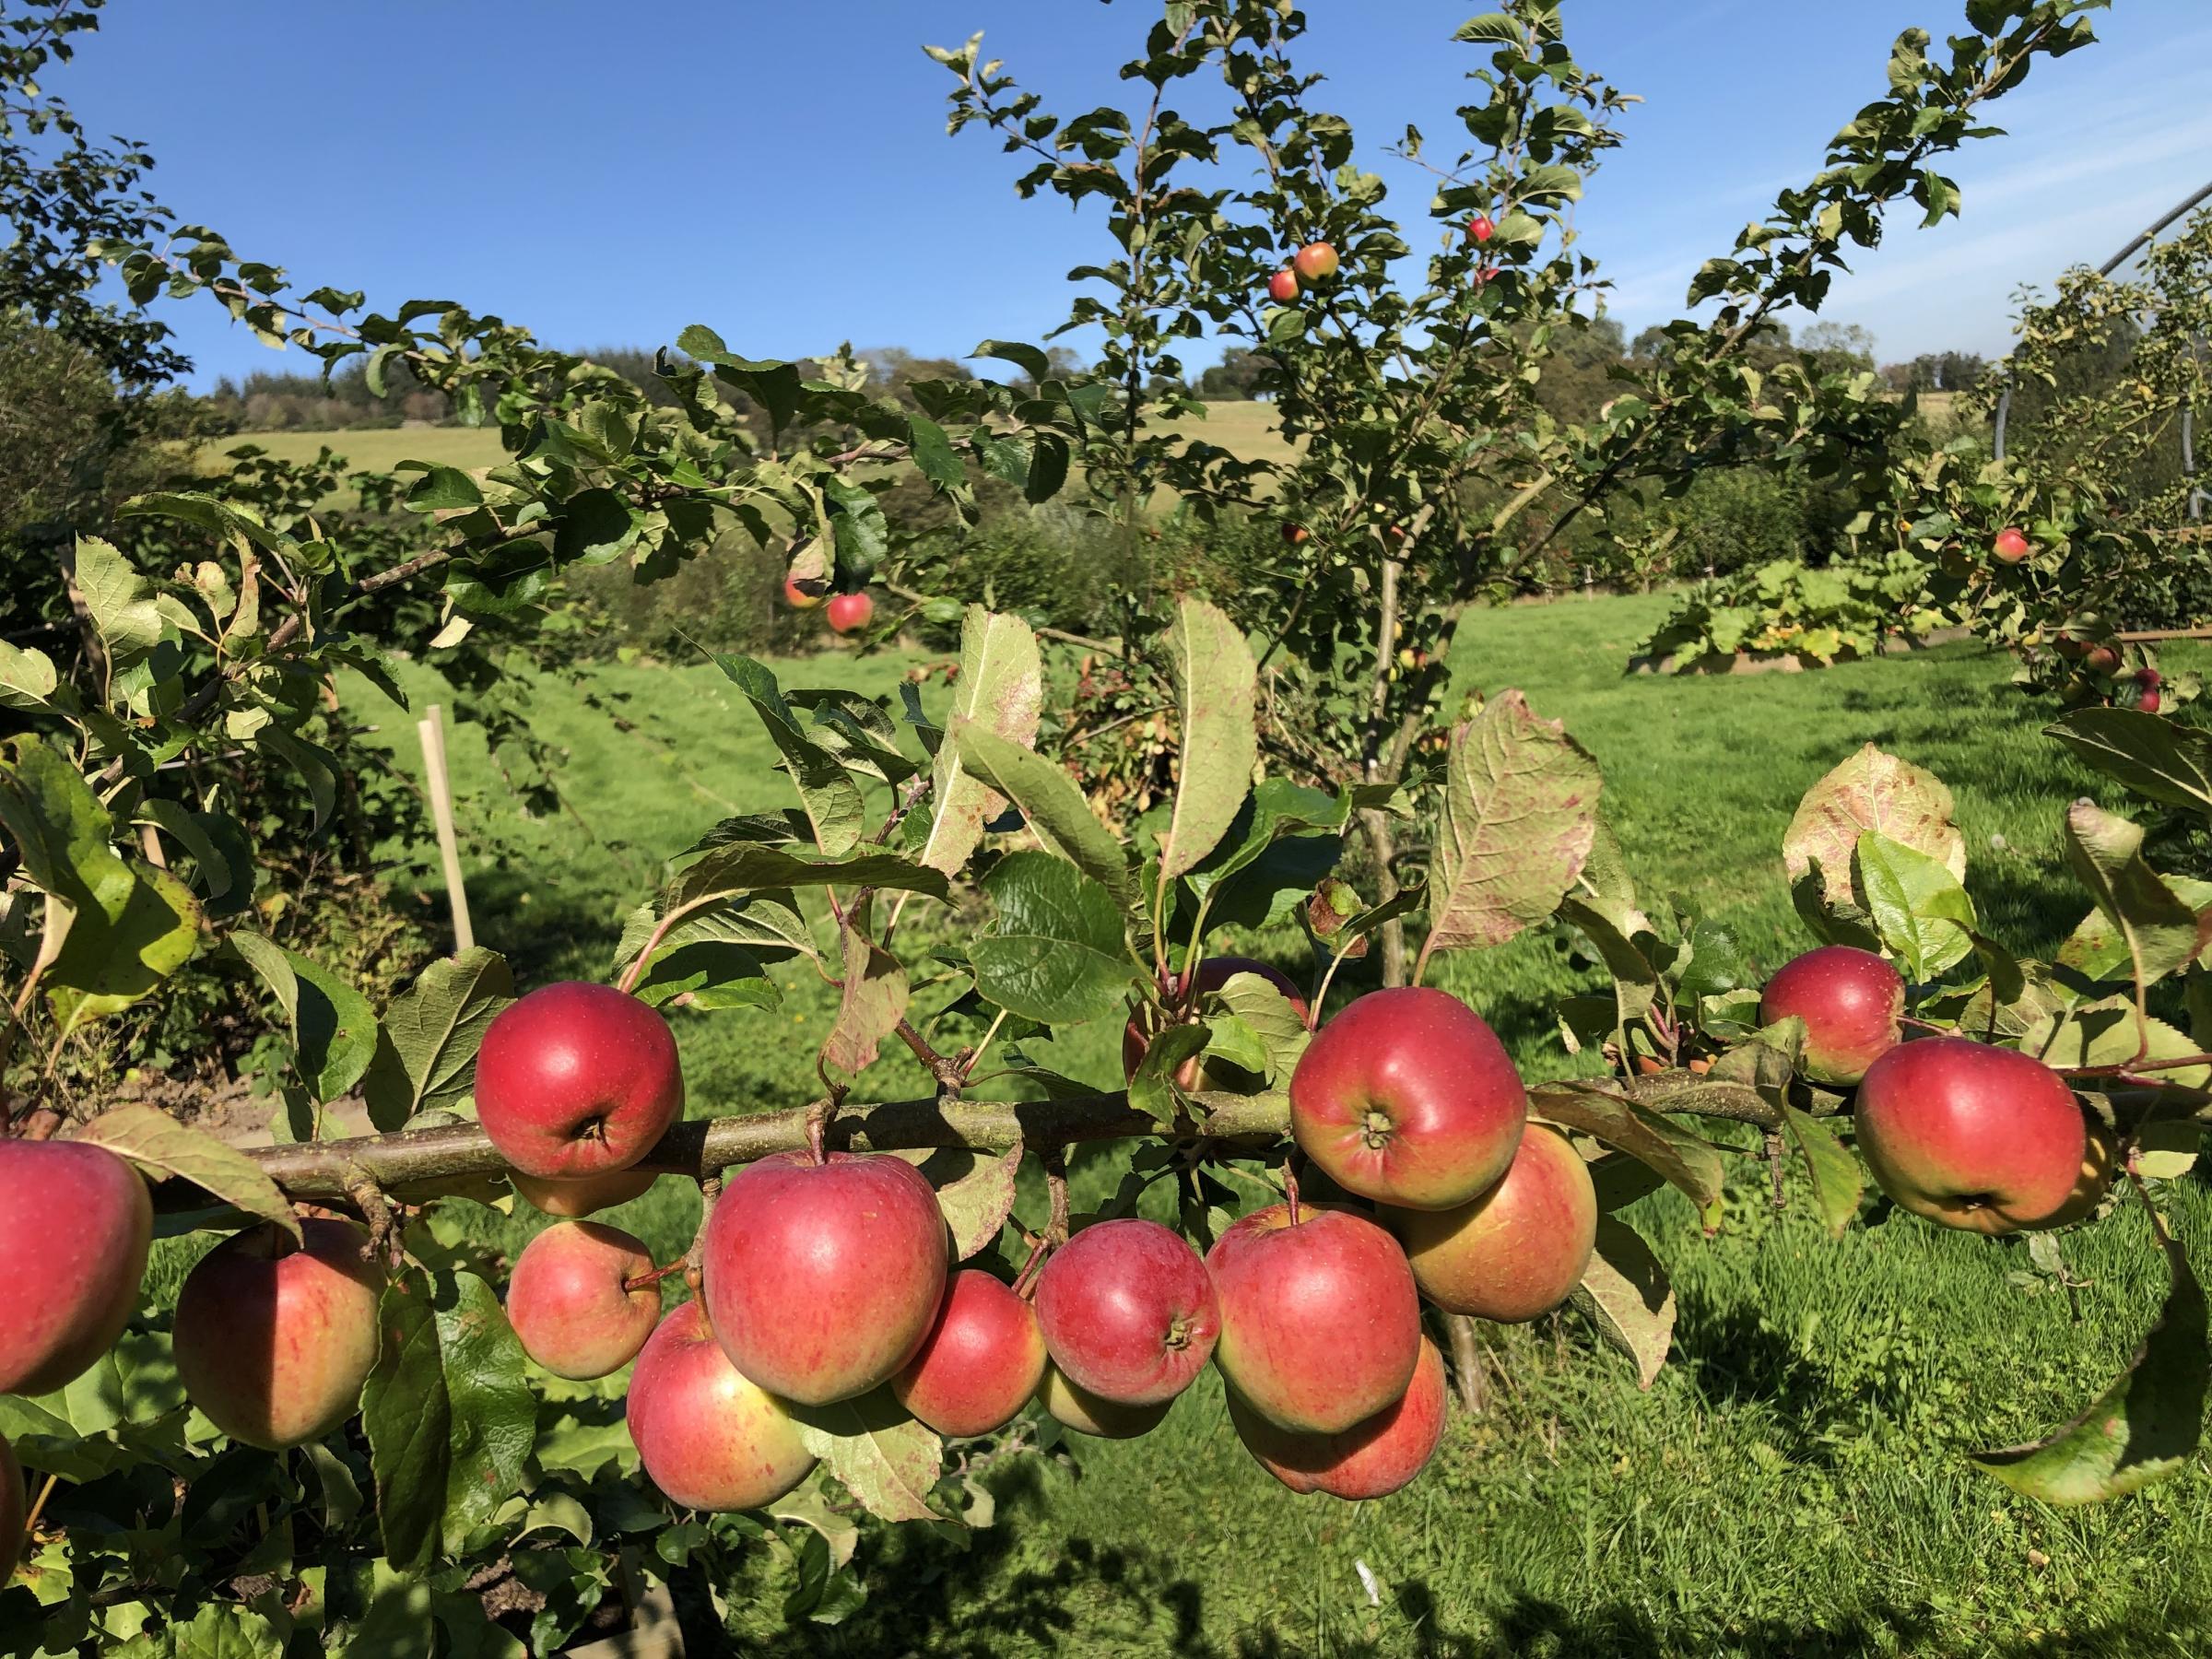 Ripe juicy apples in the Angel Feathers orchard.